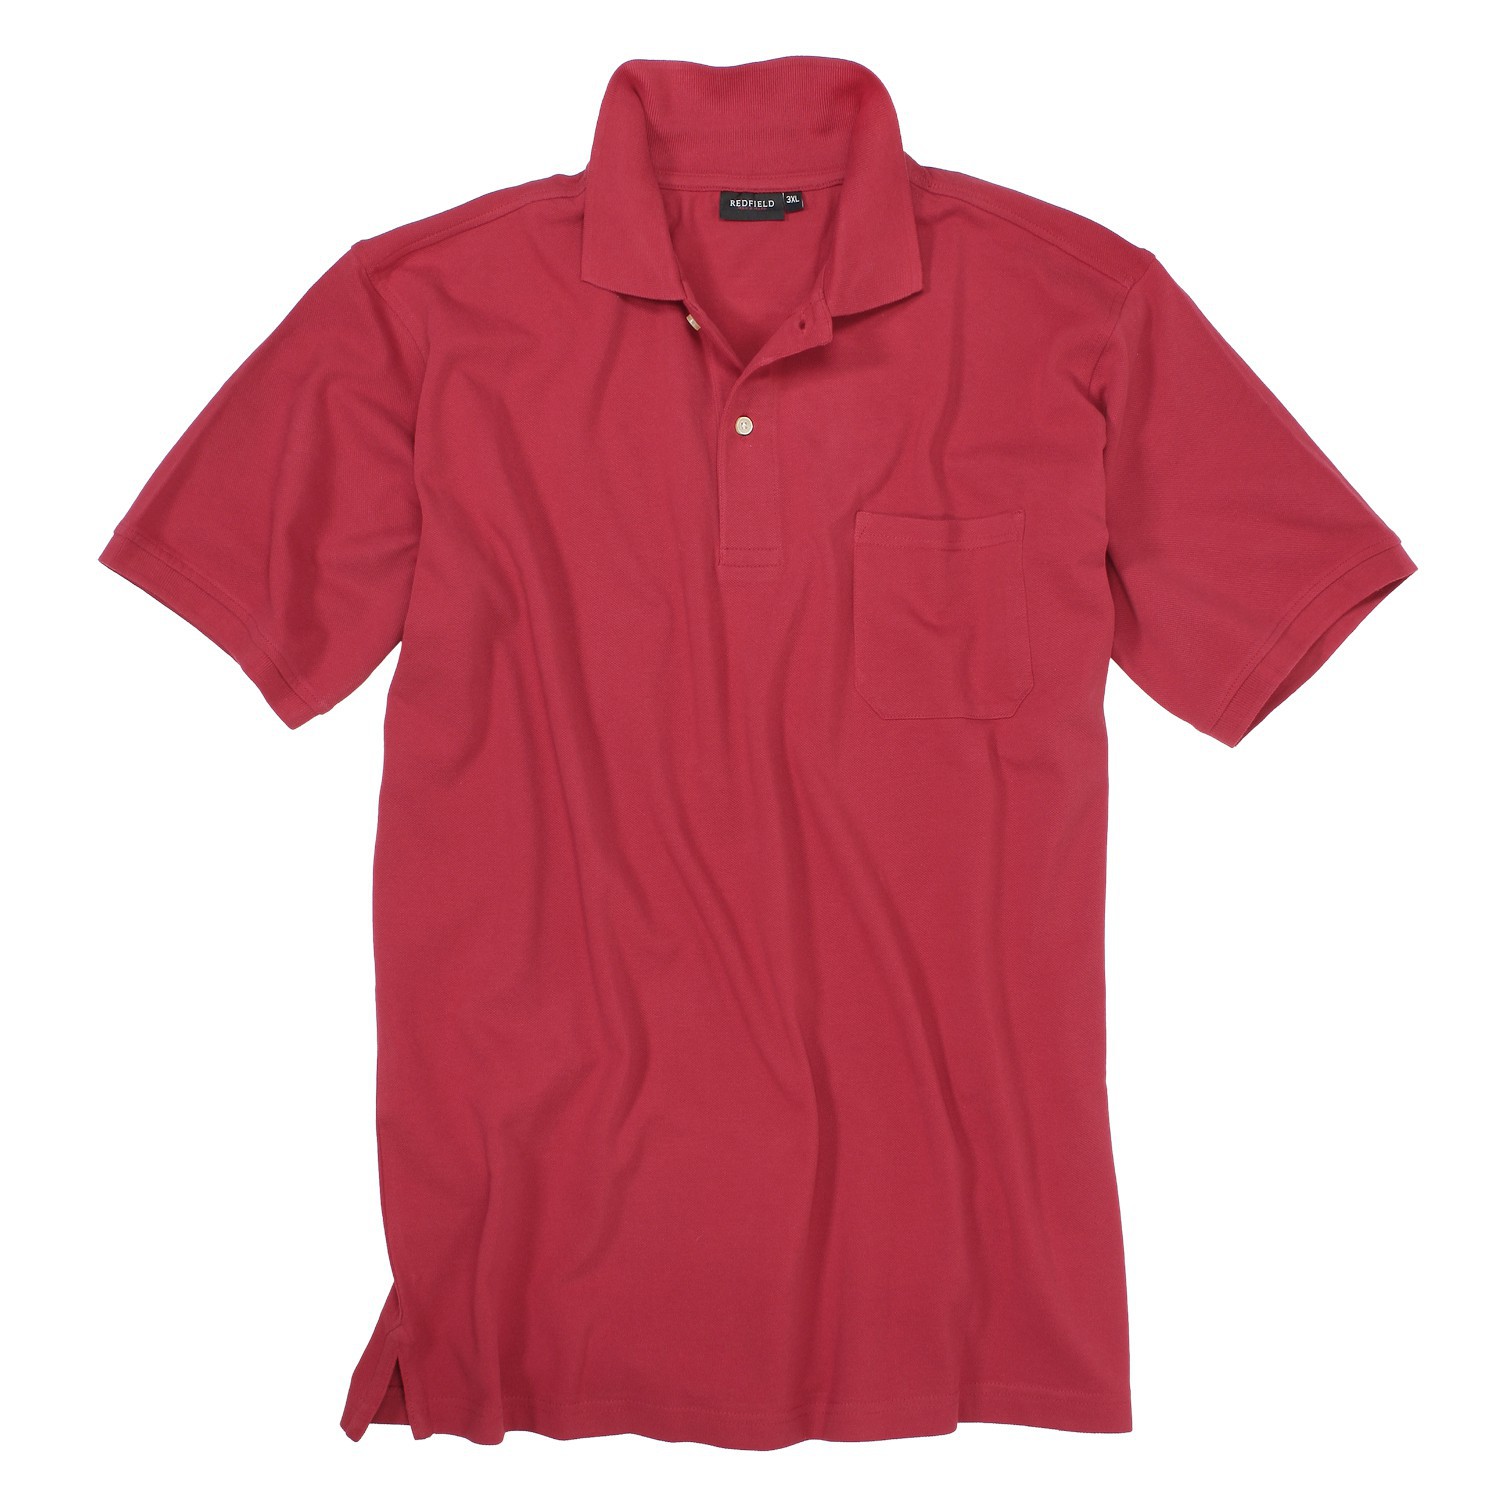 Red polo shirt by Redfield in plus sizes until 8XL